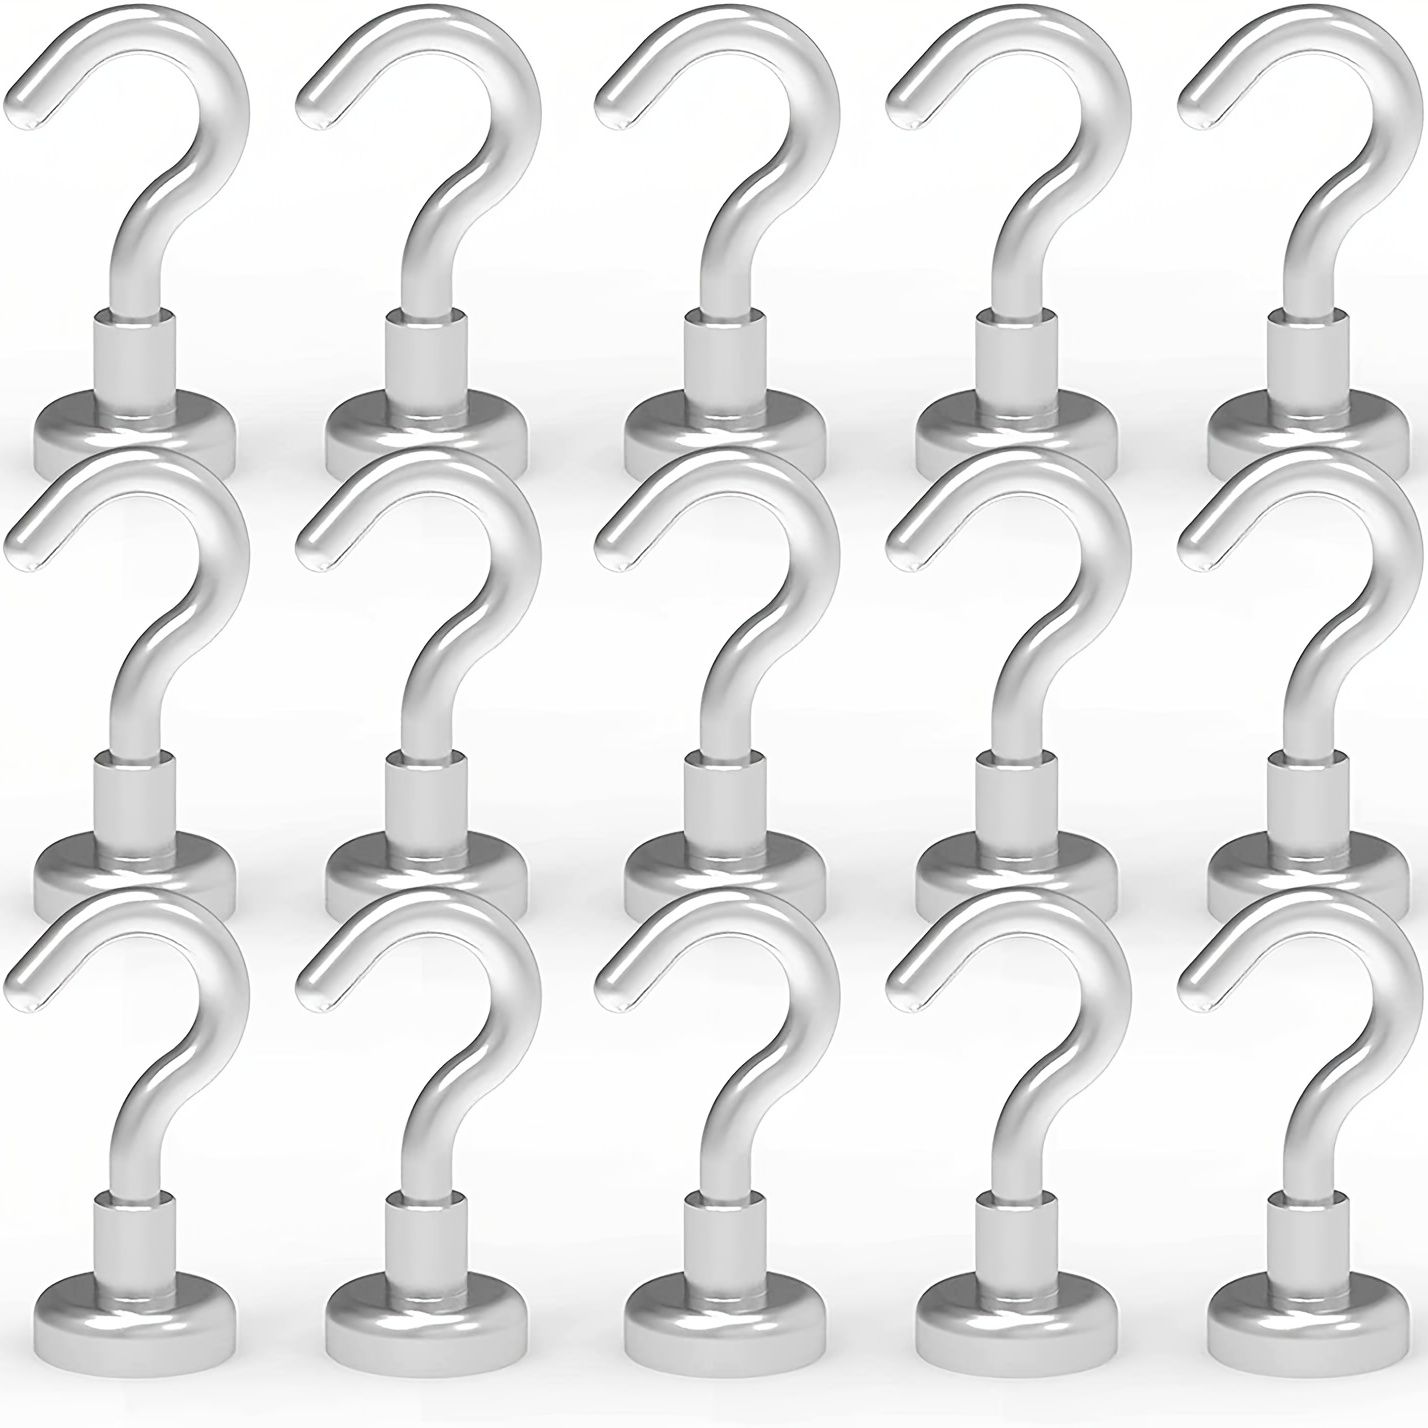 15pcs Magnetic Hooks | Free Shipping | Our Store